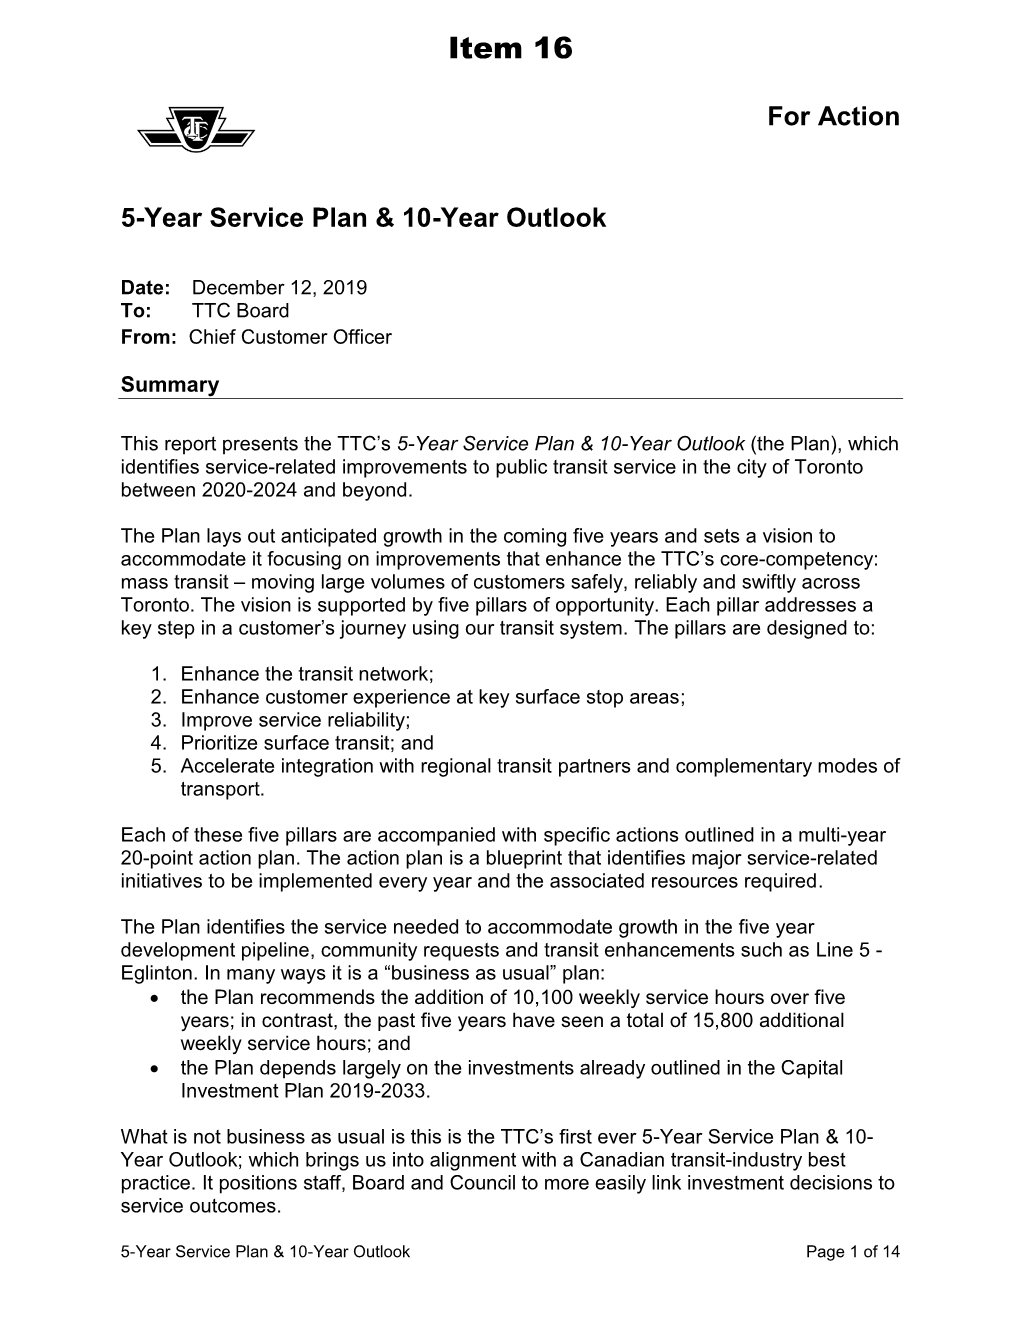 5-Year Service Plan & 10-Year Outlook (For Action)